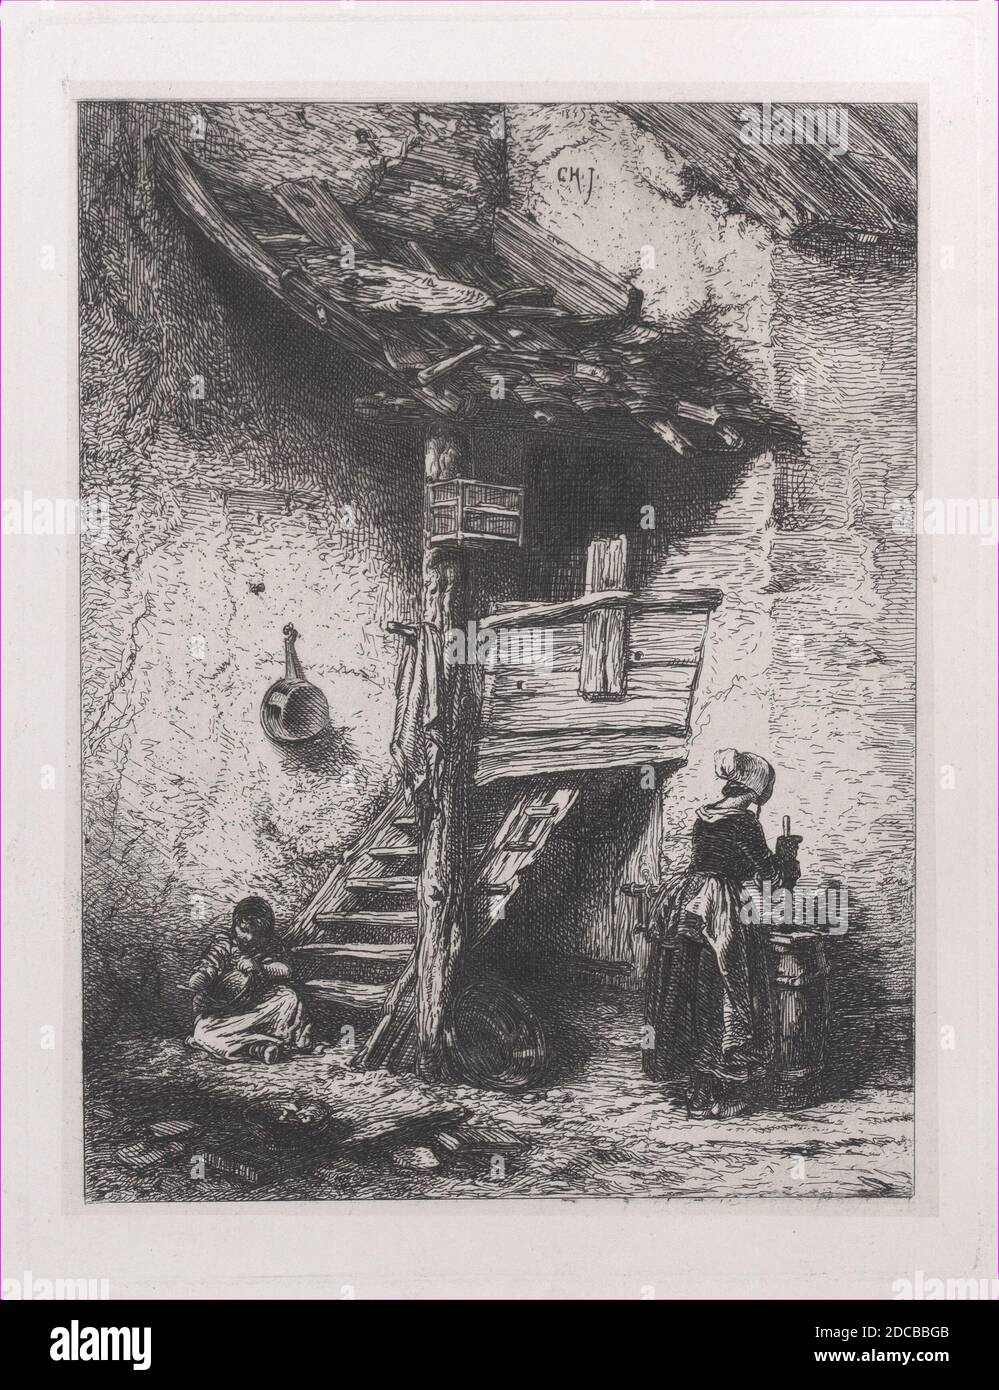 Stairs and Woman Churning, 1845. Stock Photo